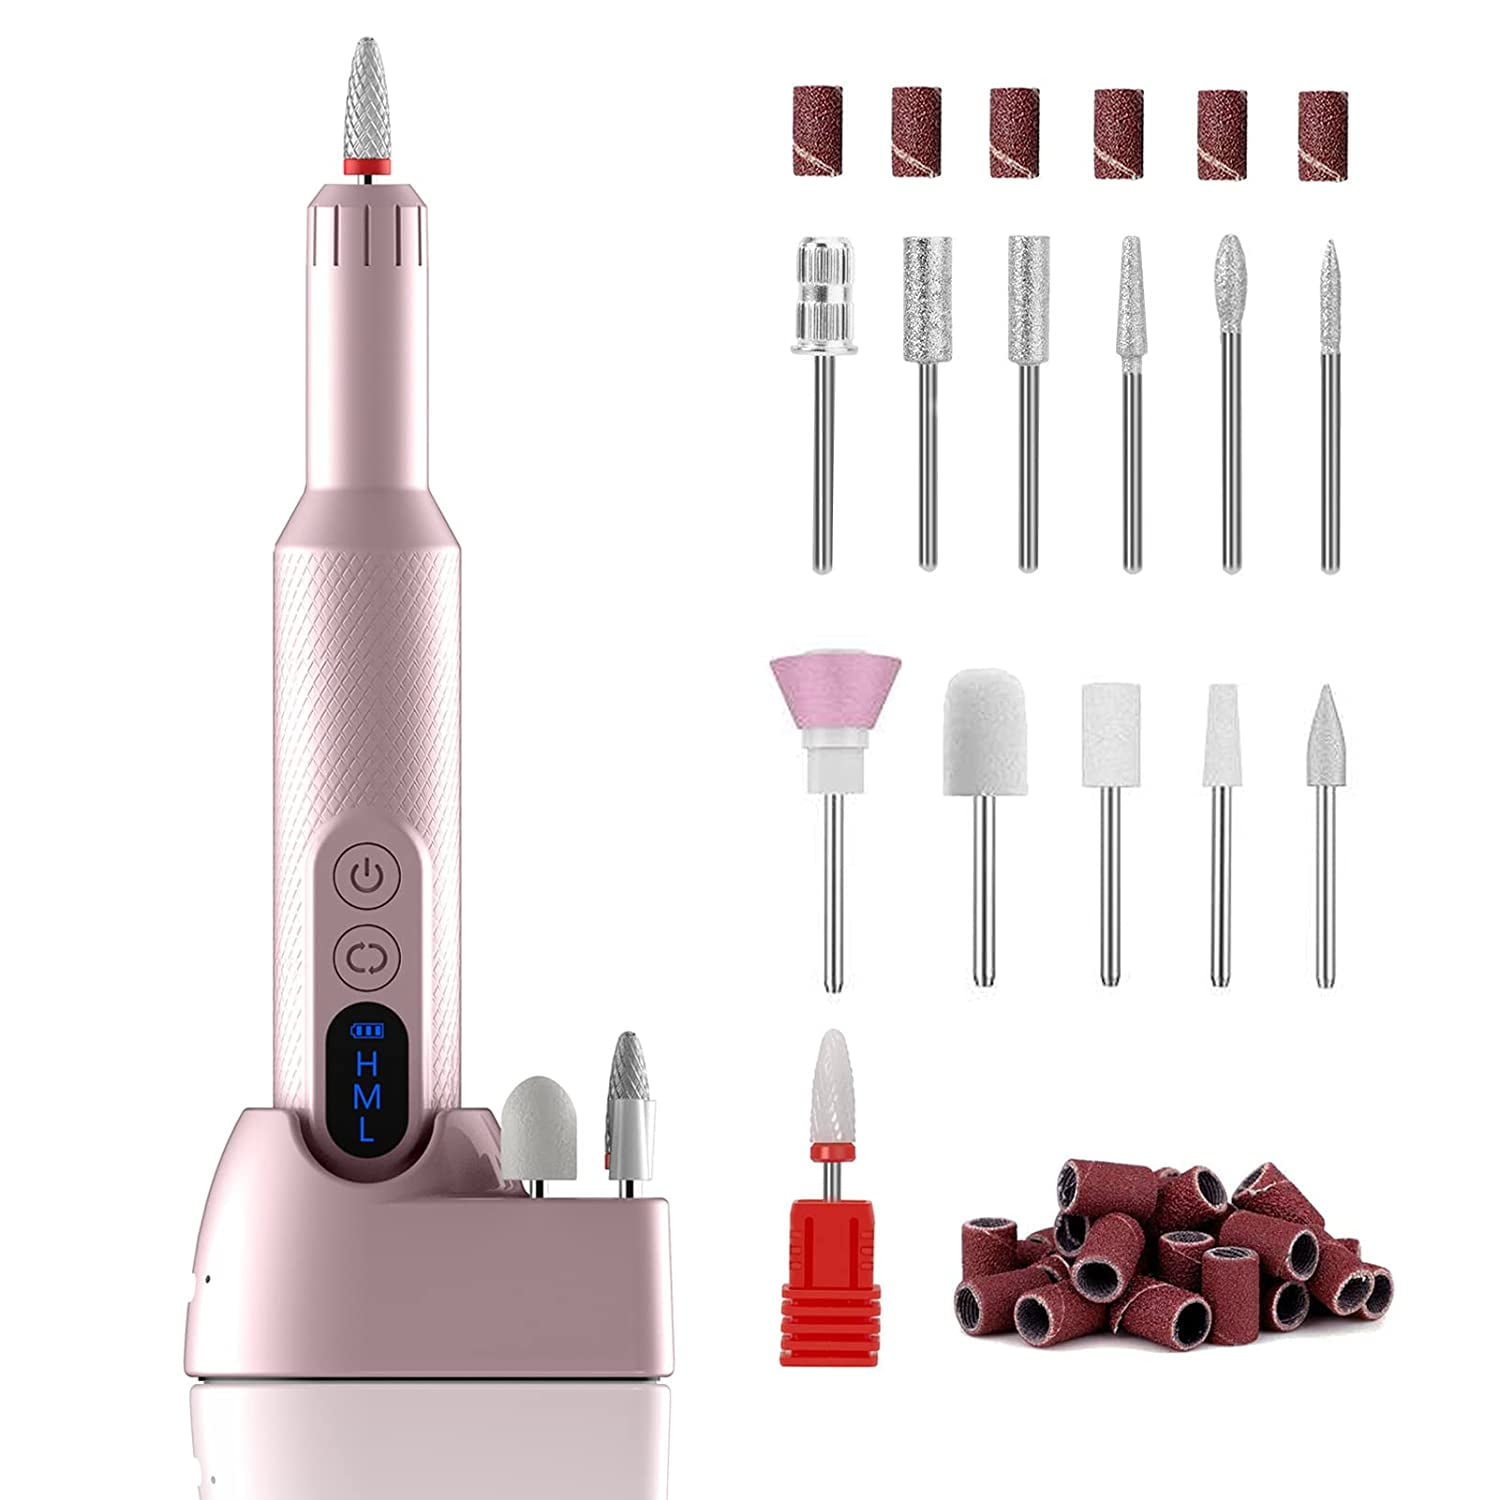 Portable Nail Drill Machine 20000RPM Electric Nail File Eirenee  Professional E Filer Manicure Tool Set with 6pcs Nail Drill Bits for Acrylic  Nails Gel Polish Removing, Nail Tech Home DIY Use –